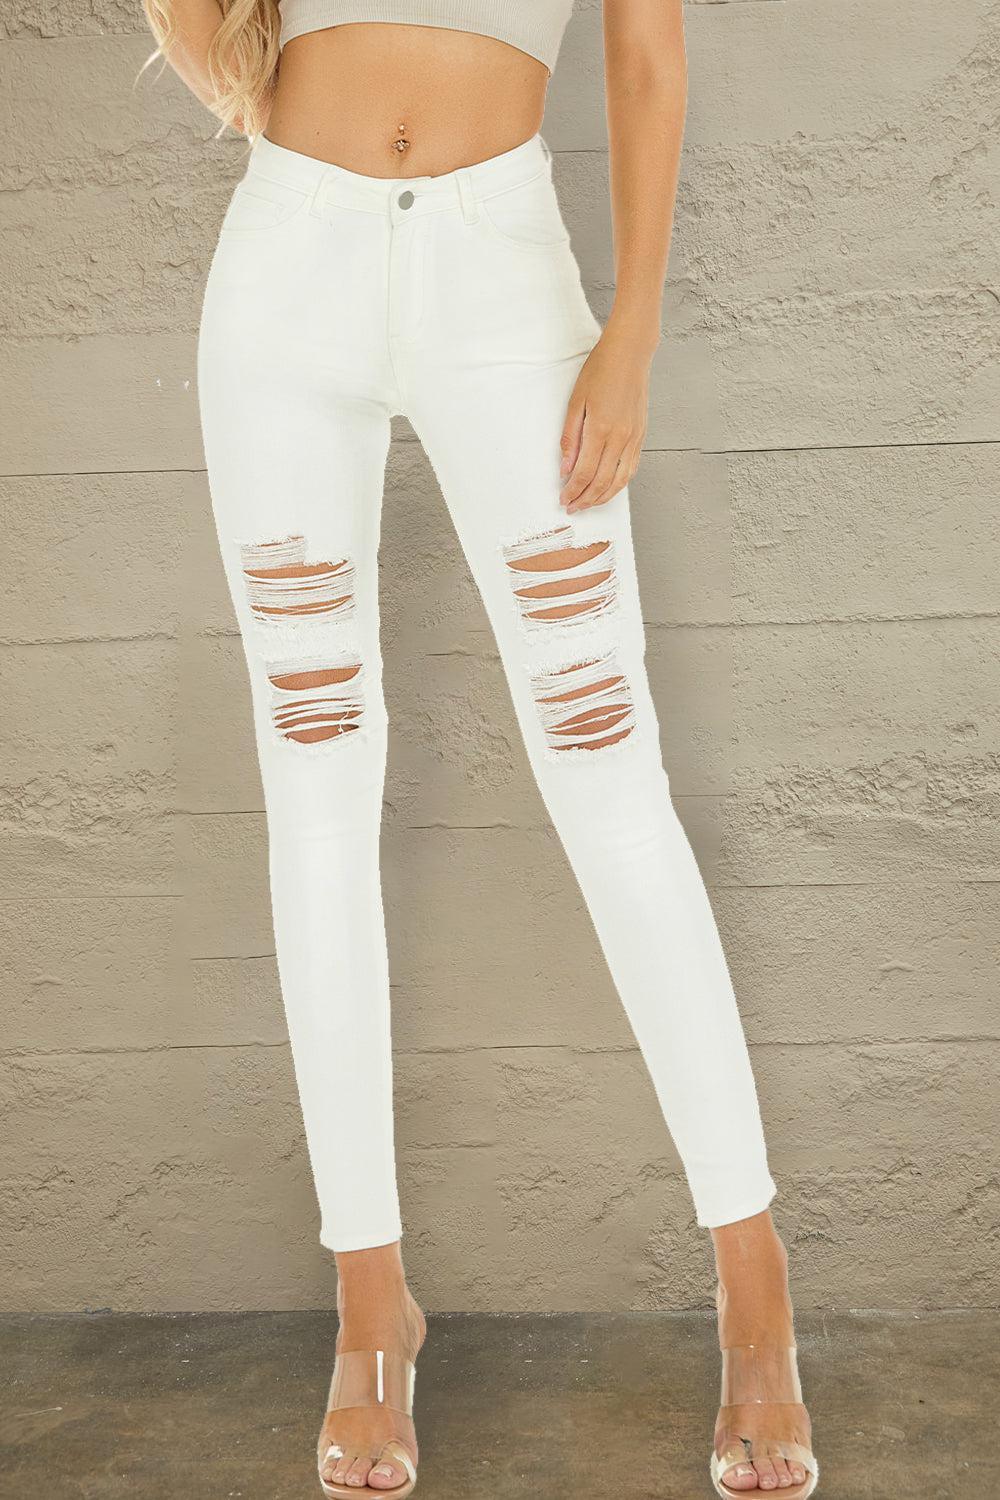 a woman wearing white ripped jeans and a crop top